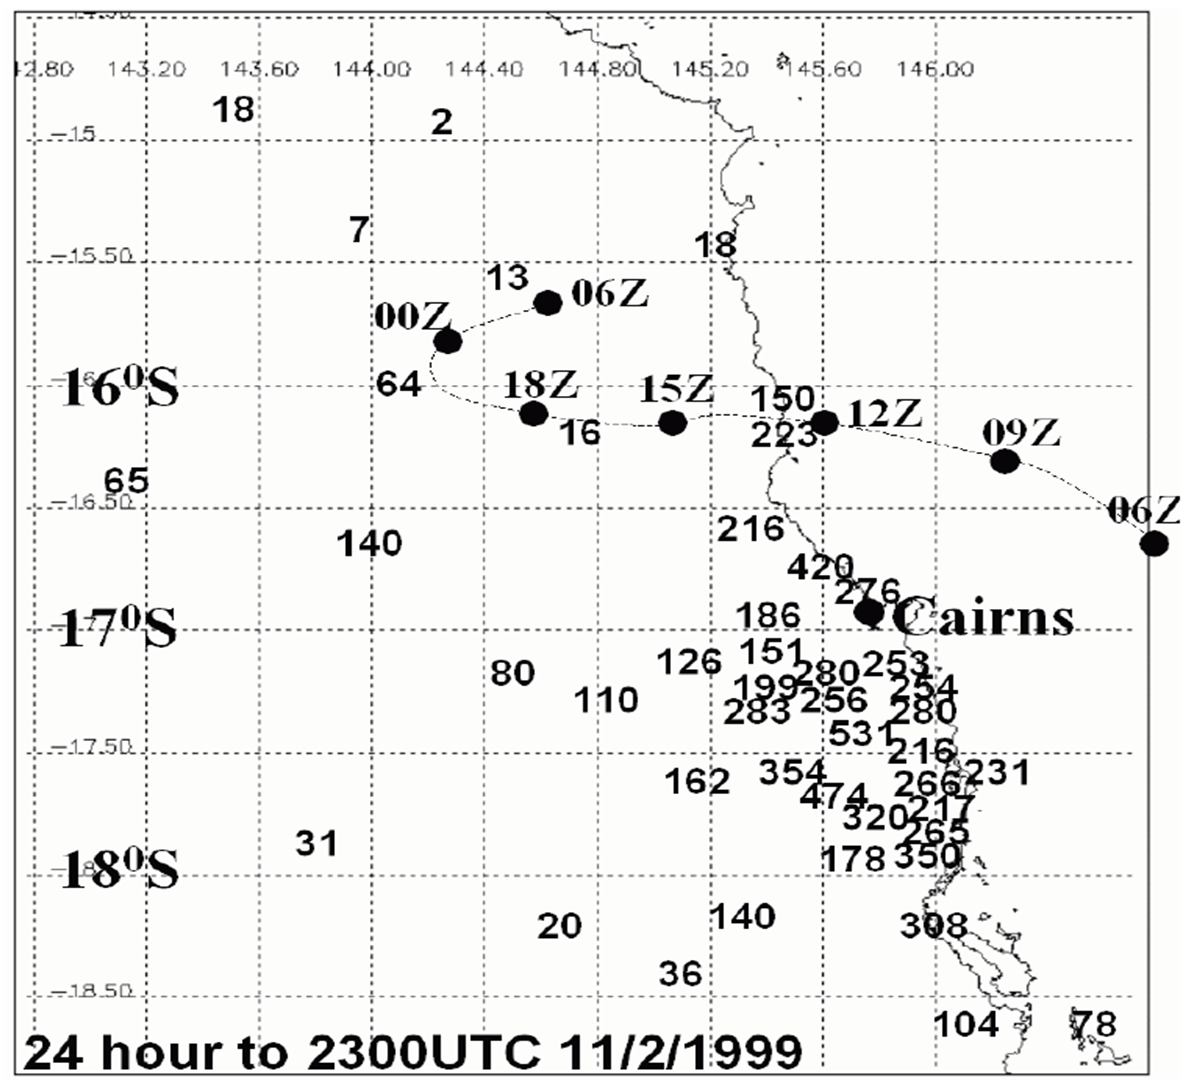 24 hour rainfall (mm) for 11 Feburary 1999 with the track of tropical cyclone Rona